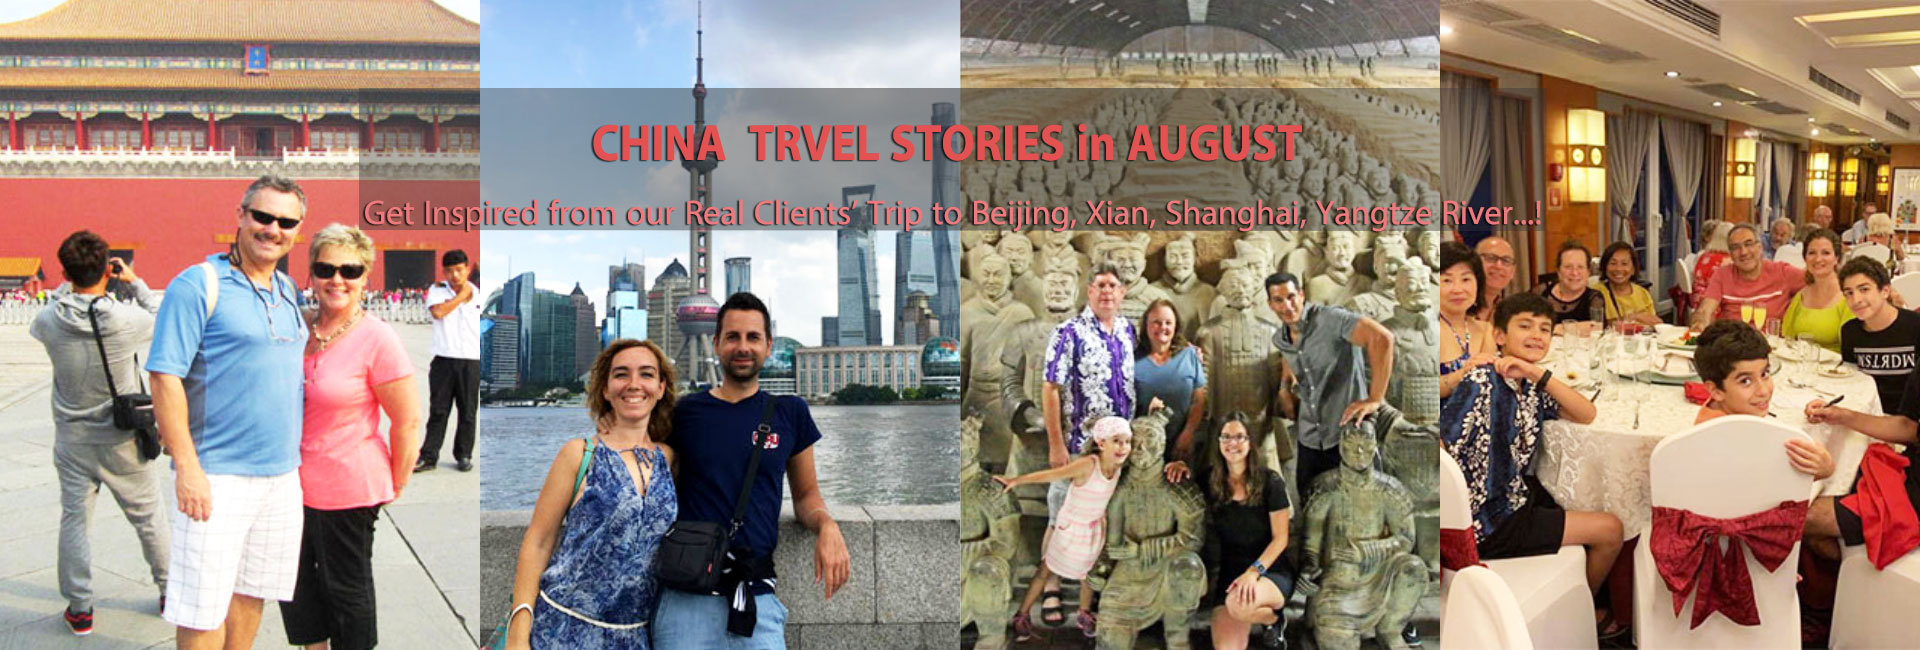 China Travel Stories in August